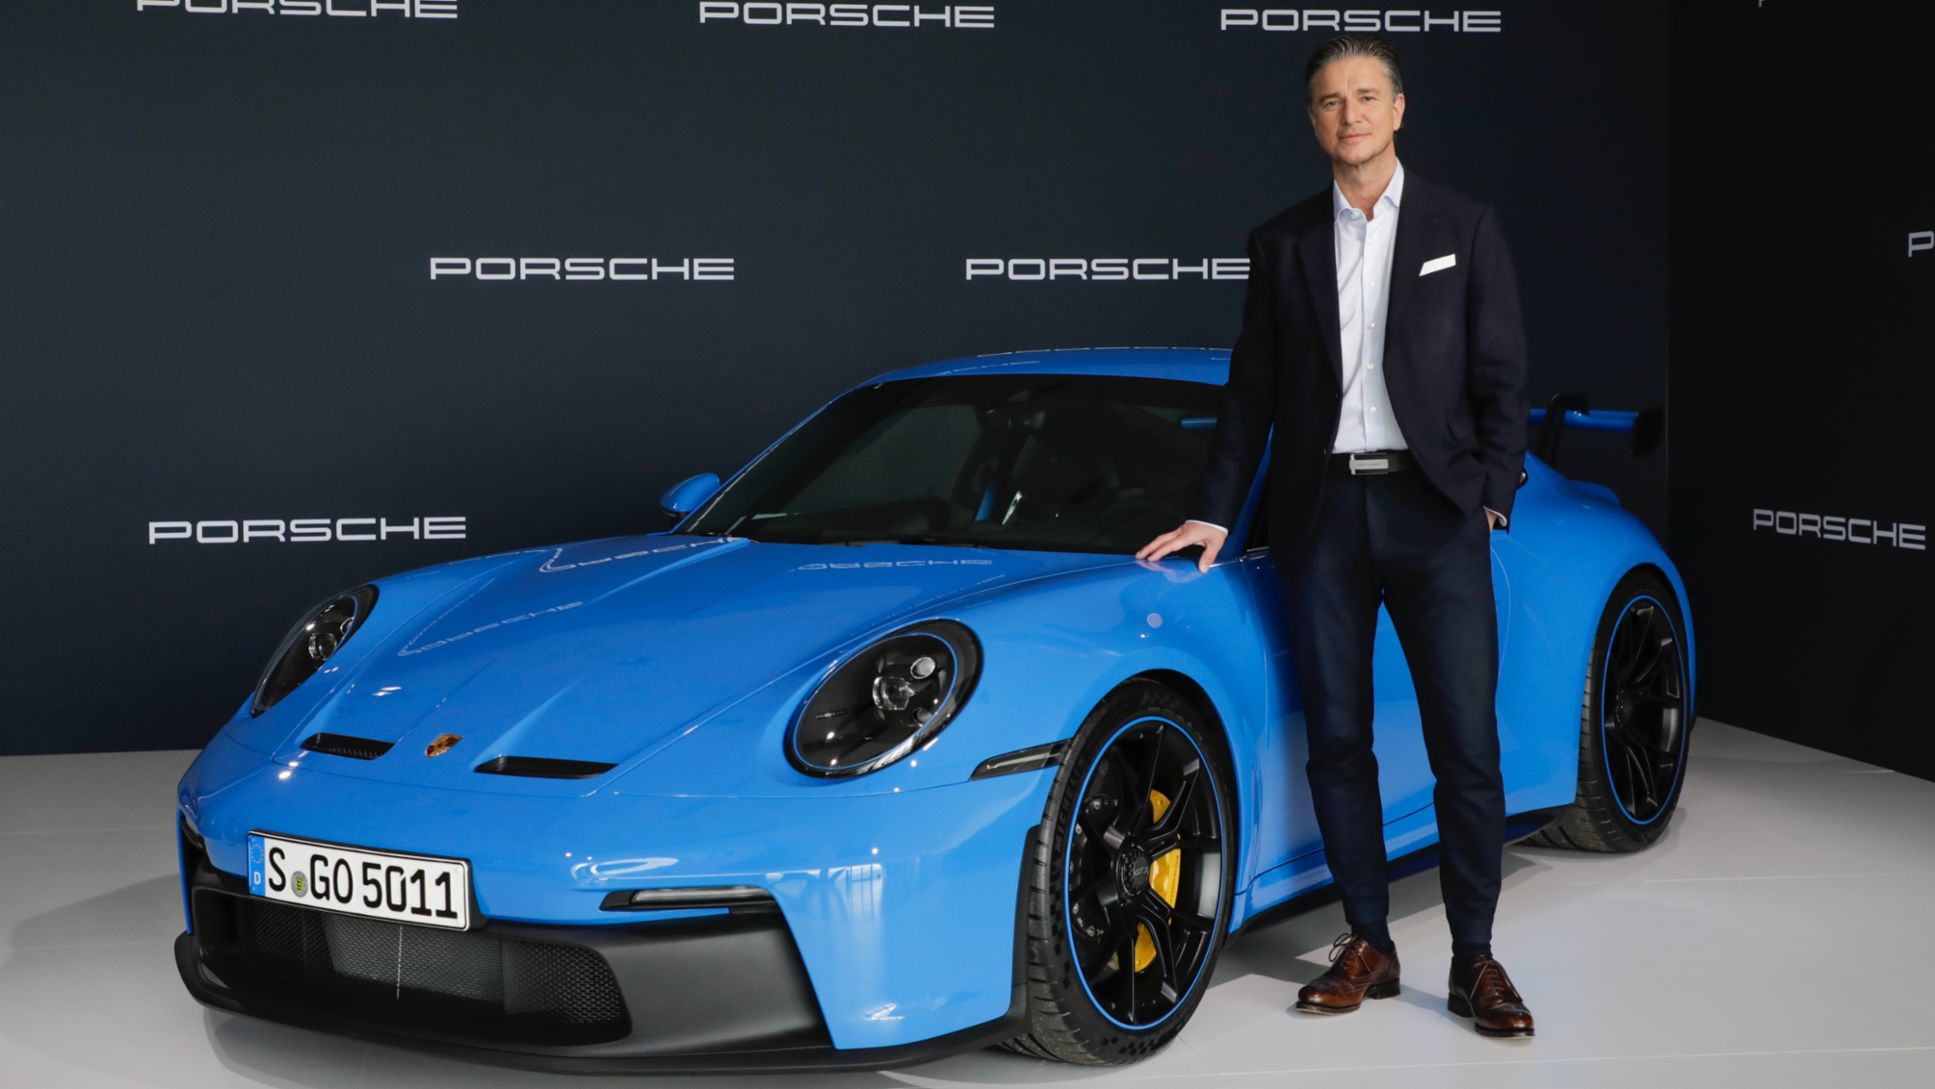 Lutz Meschke, Deputy Chairman of the Executive Board and Member of the Executive Board responsible for Finance and IT of Dr. Ing. h.c. F. Porsche AG, 911 GT3, Annual Press Conference, 2021, Porsche AG